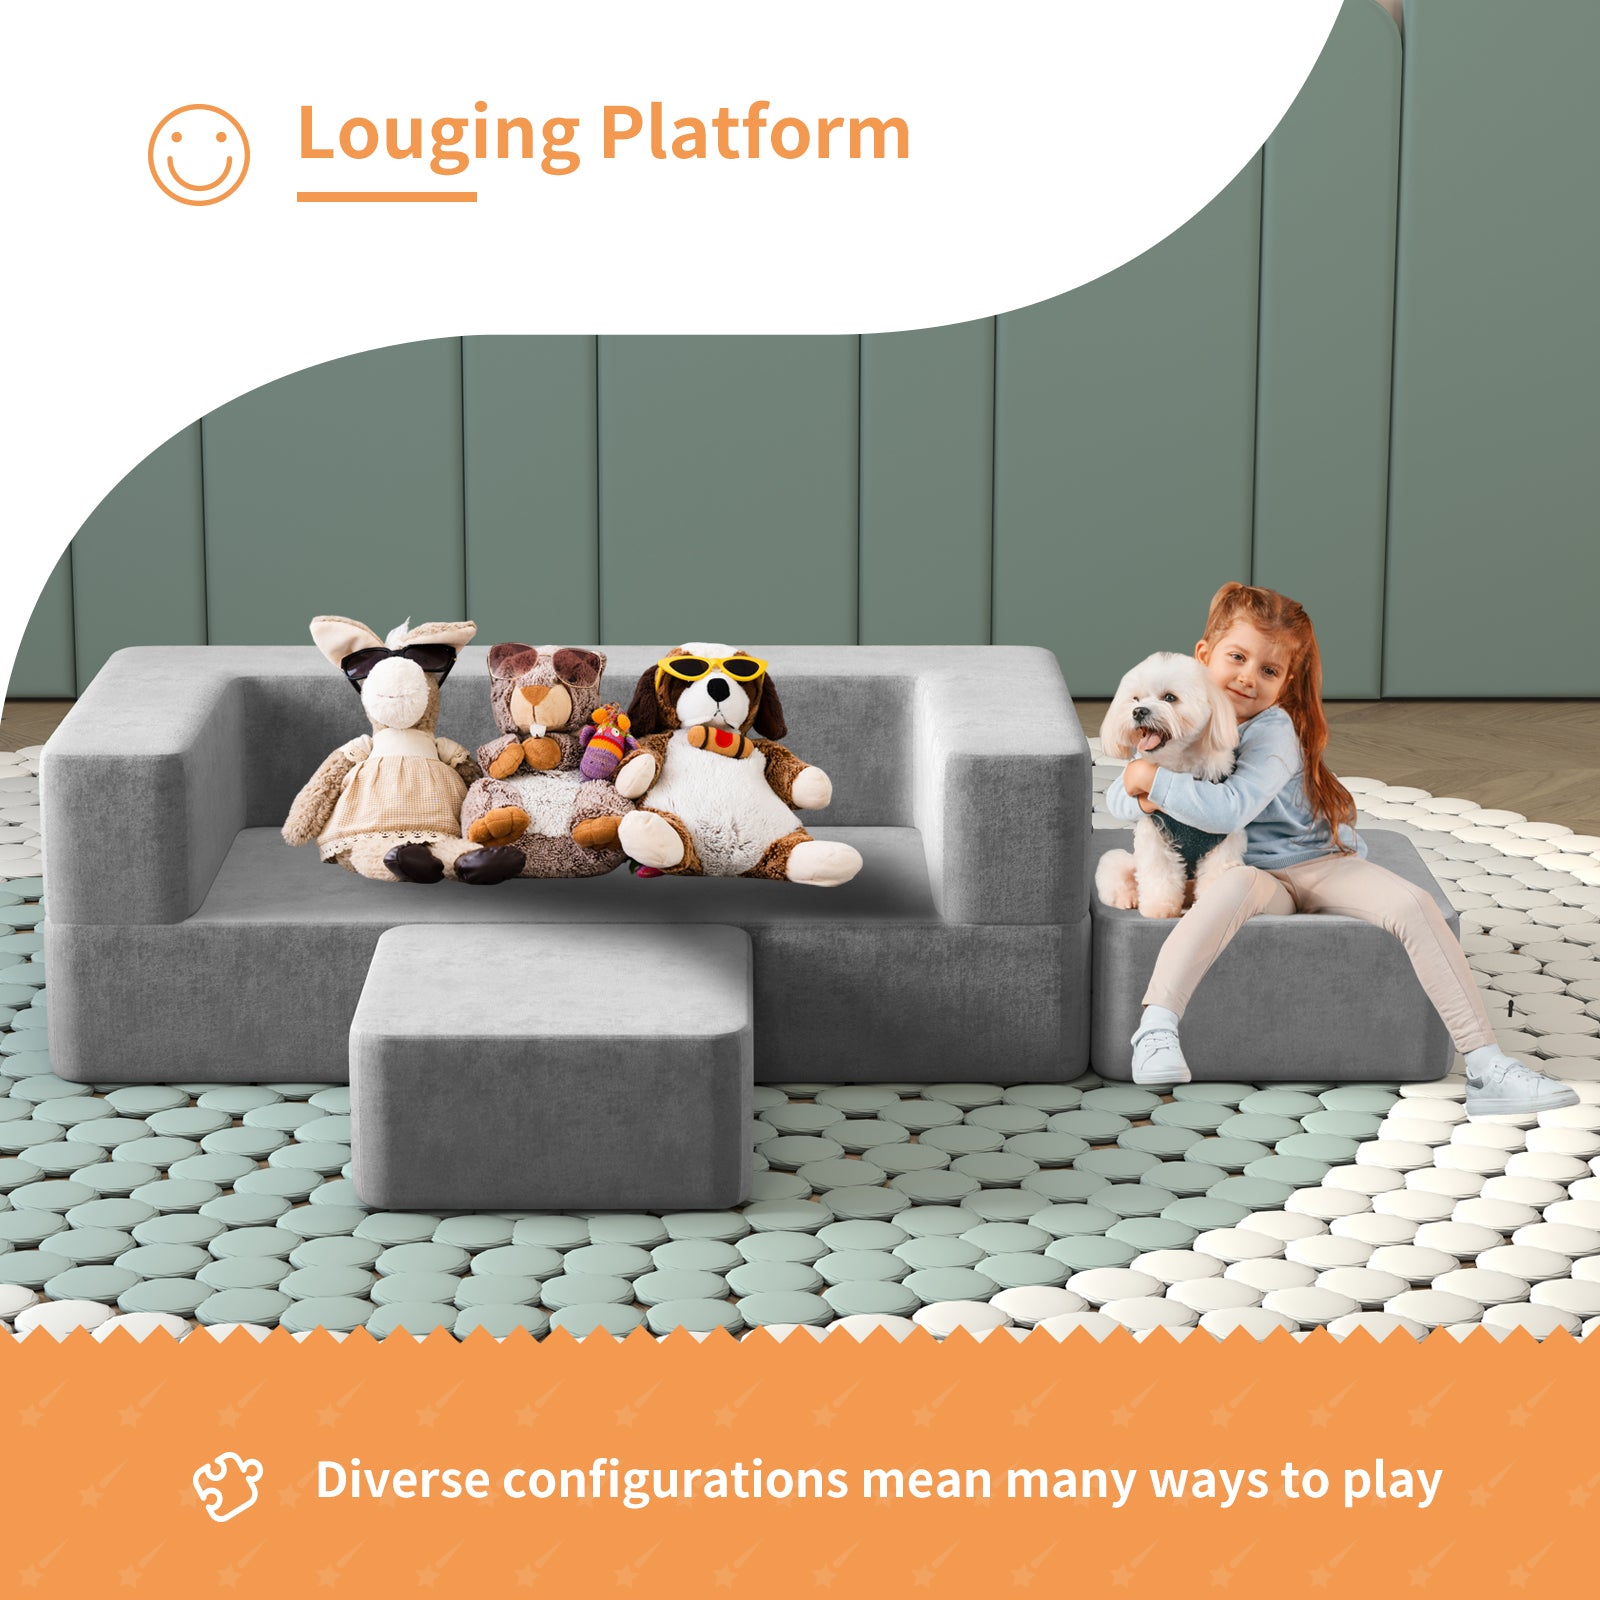 – Couch, Washable Couch Covers Play Durable with Kids and Multi-color